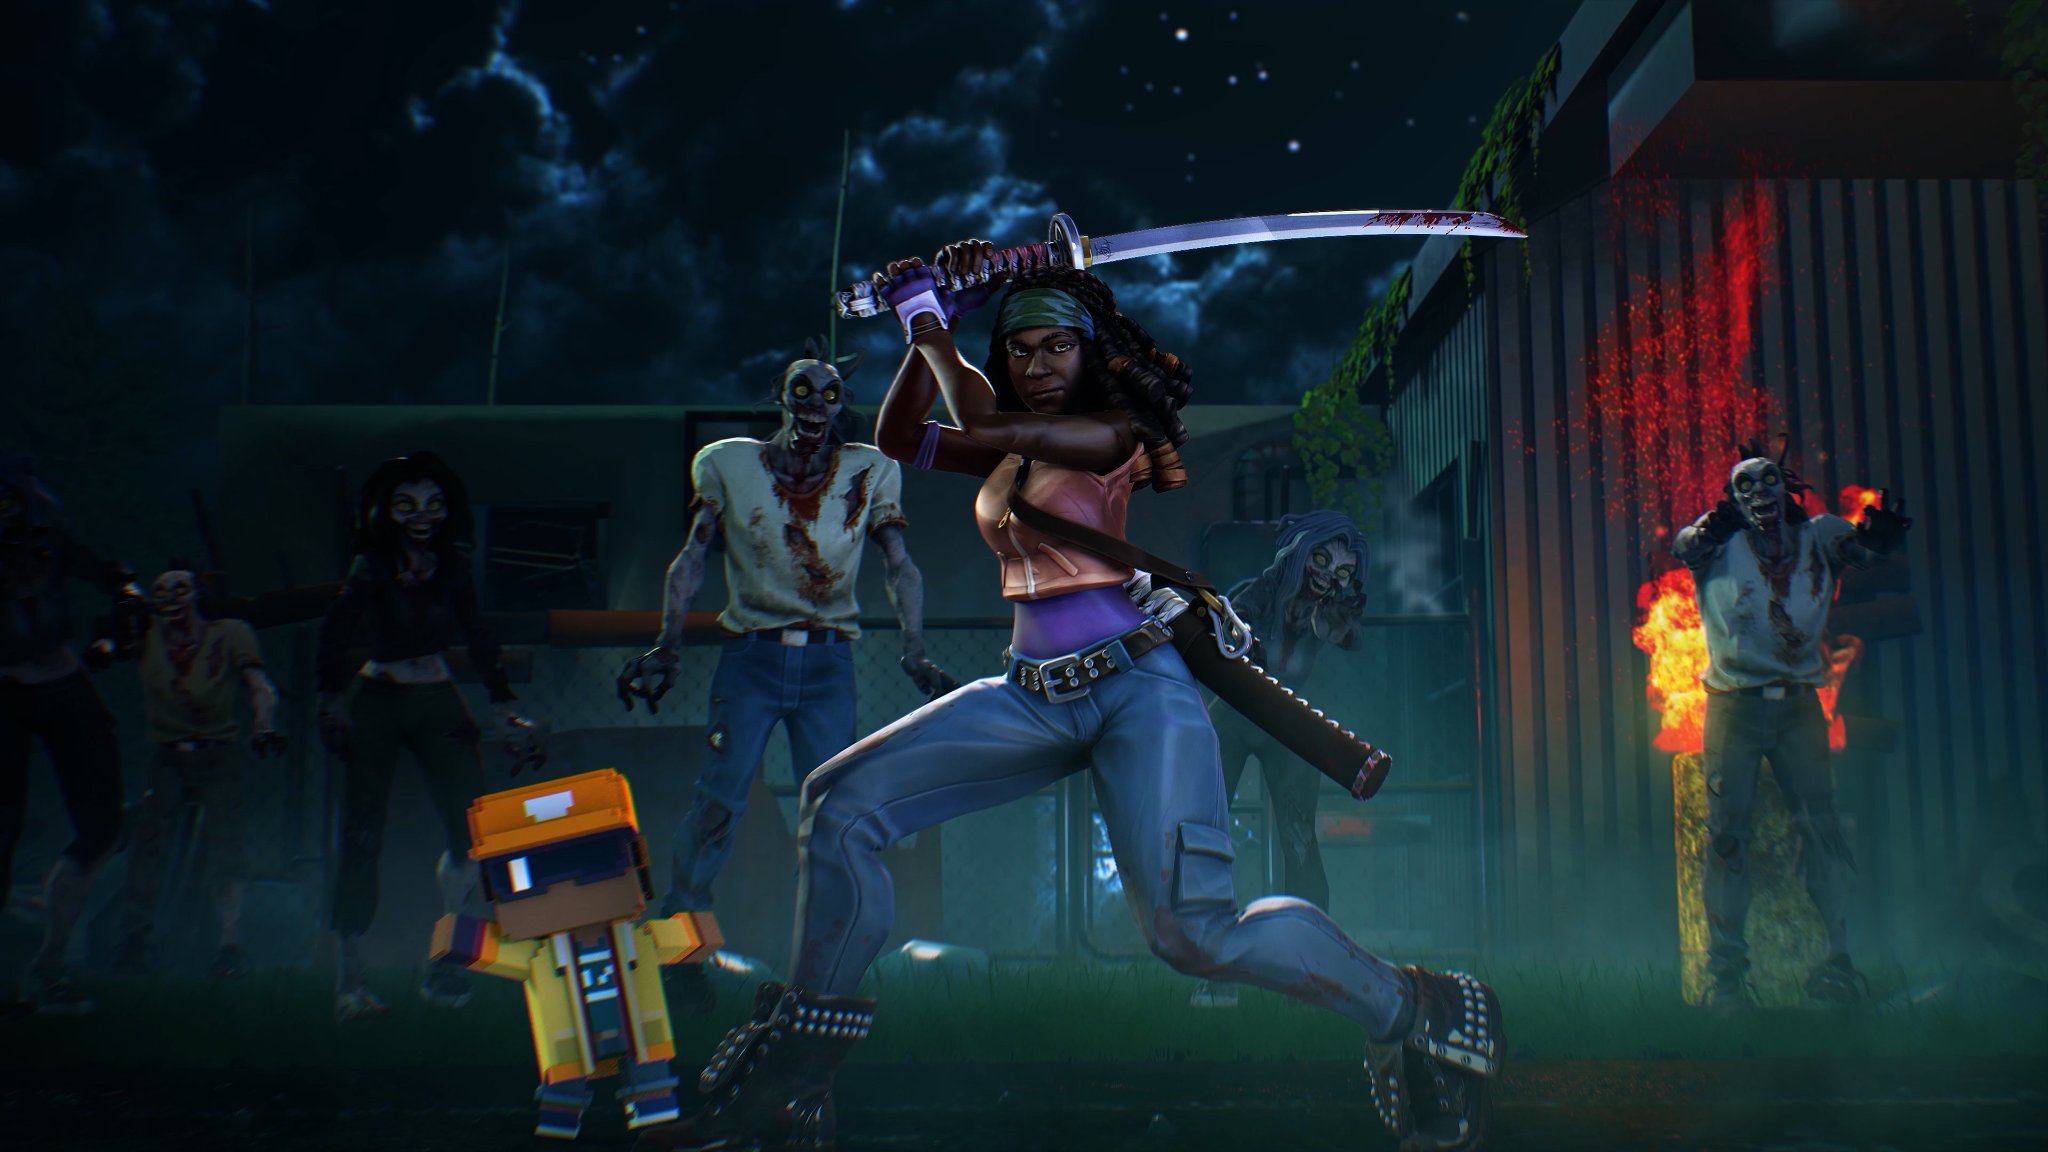 brand-film-launch- character with sword fighting zombies